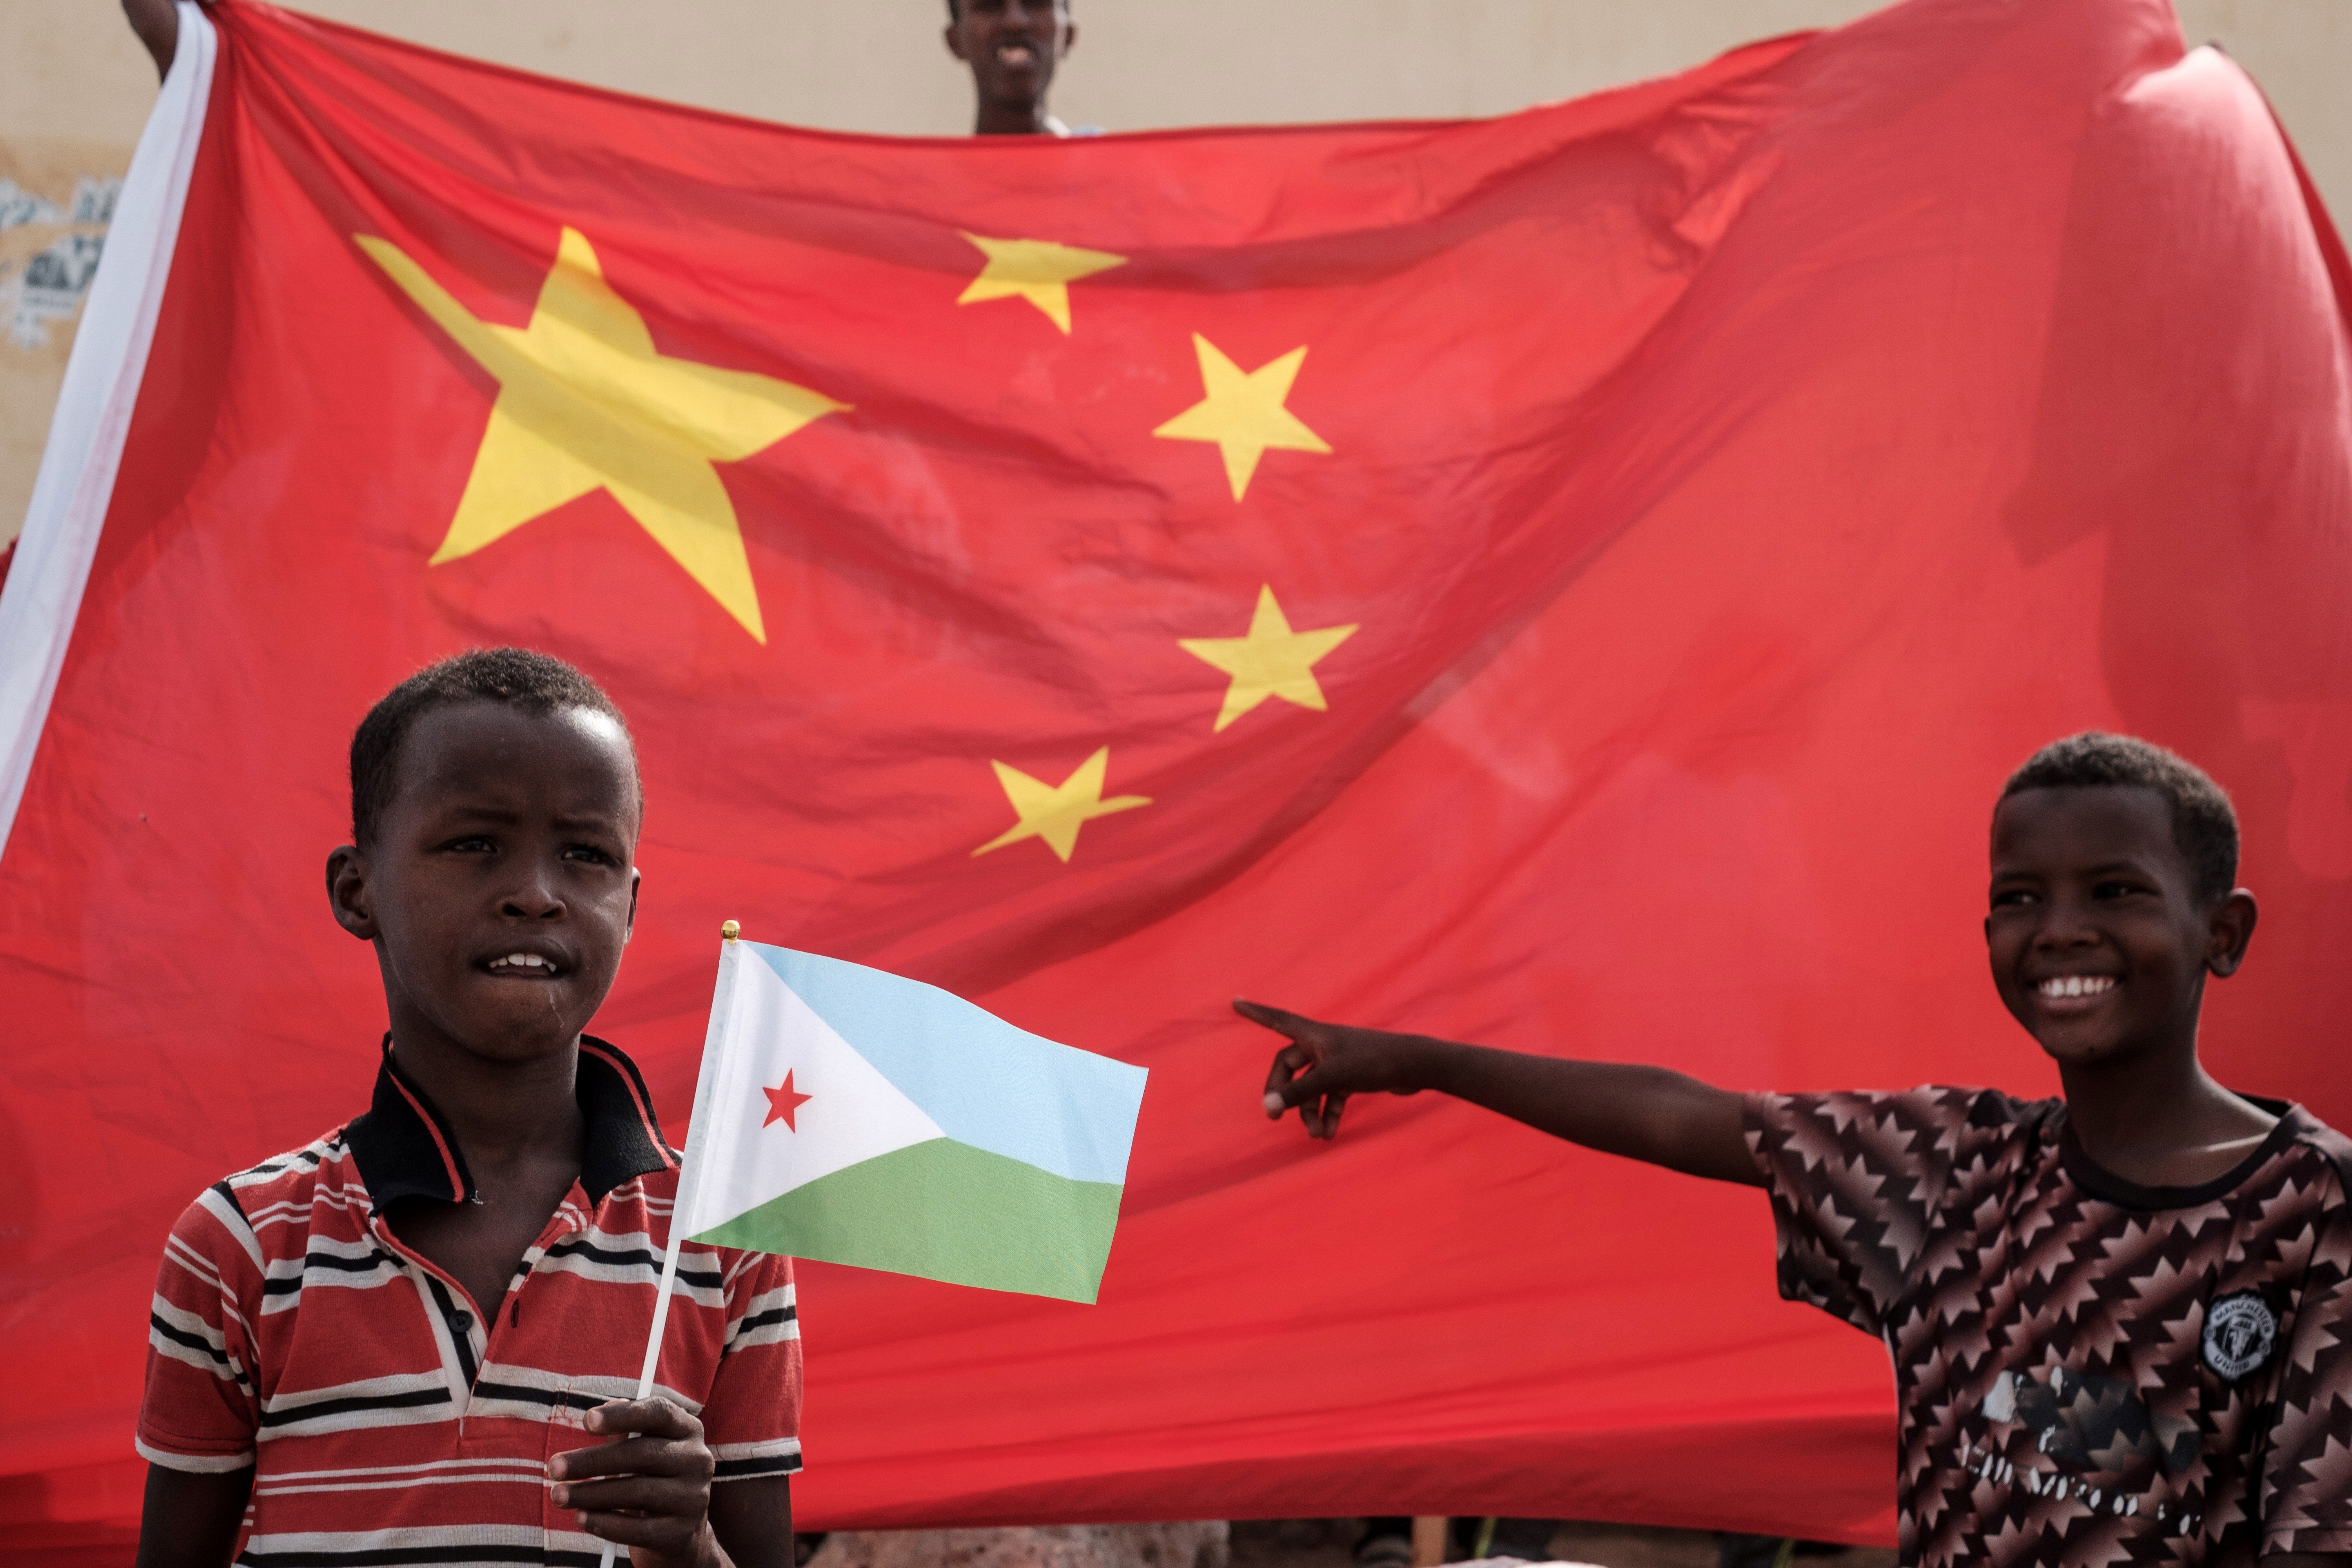 A boy holds Djiboutian national flag in front of Chinese national flag as he waits for Djibouti's President Ismail Omar Guellehas before the launching ceremony of new 1,000-unit housing construction project in Djibouti in 2018. Photo: AFP